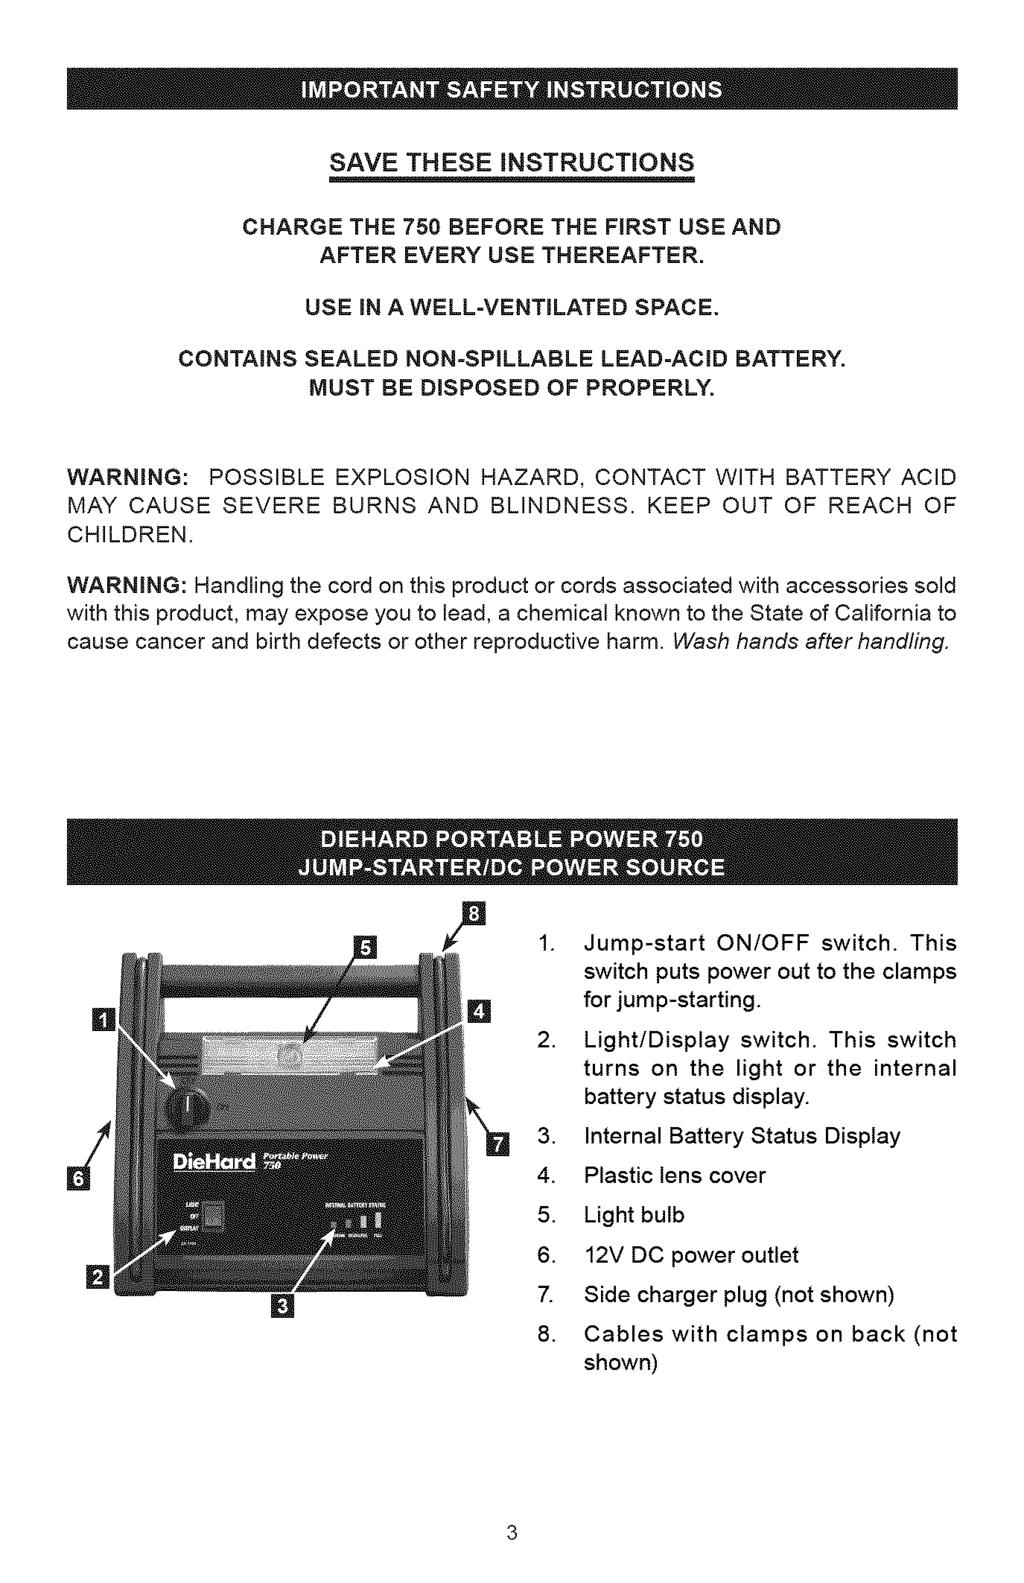 SAVE THESE INSTRUCTIONS CHARGE THE 750 BEFORE THE FIRST USE AND AFTER EVERY USE THEREAFTER. USE _N A WELL=VENTiLATED SPACE. CONTAINS SEALED NON=SPILLABLE LEAD=ACID BATTERY.